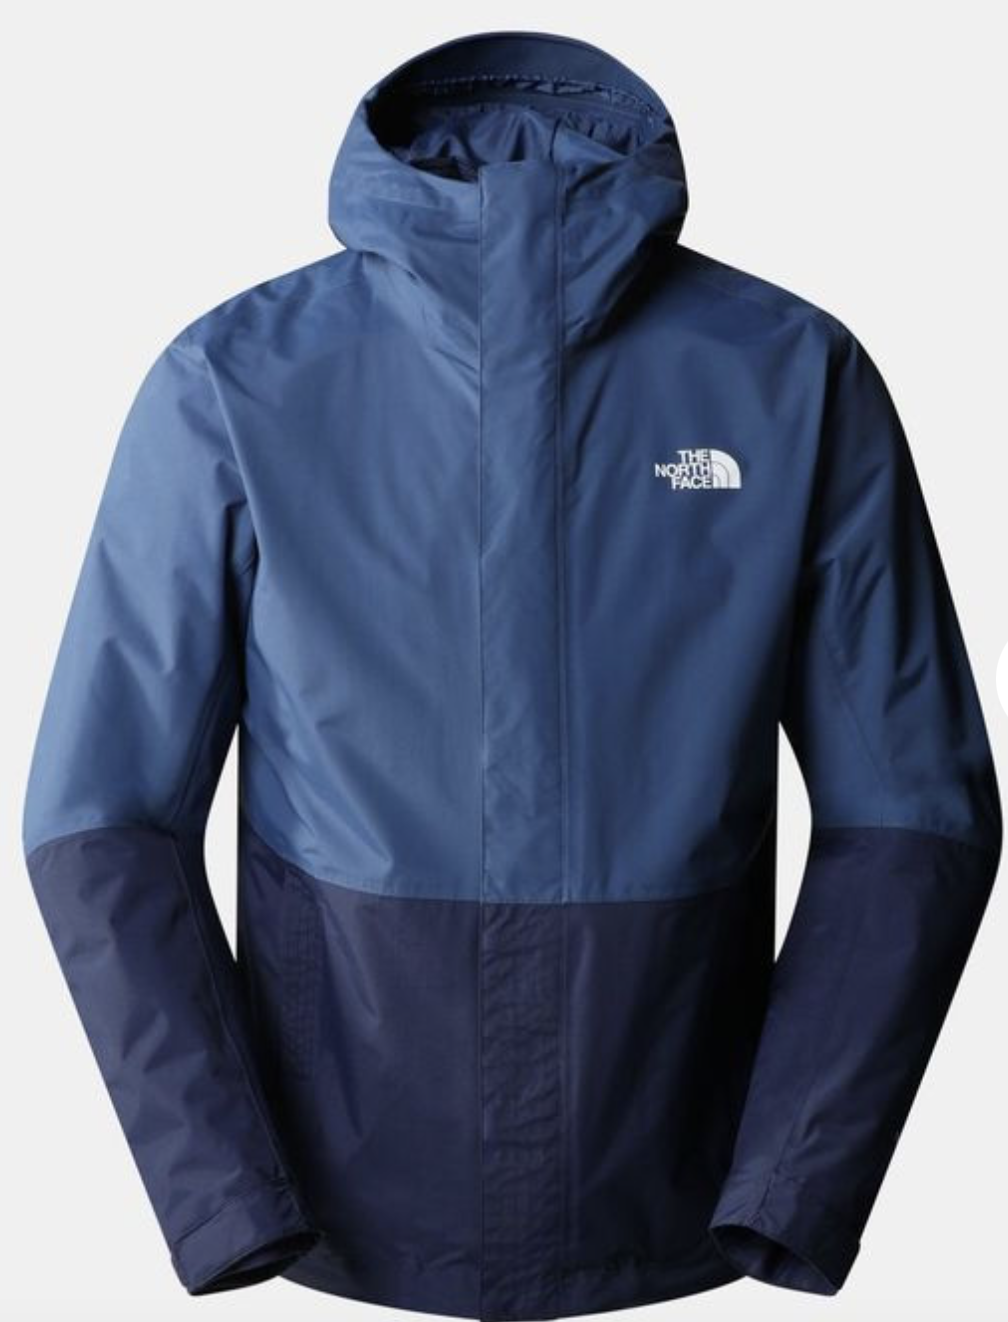 The North Face New Synthetic Triclimate 3-in-1